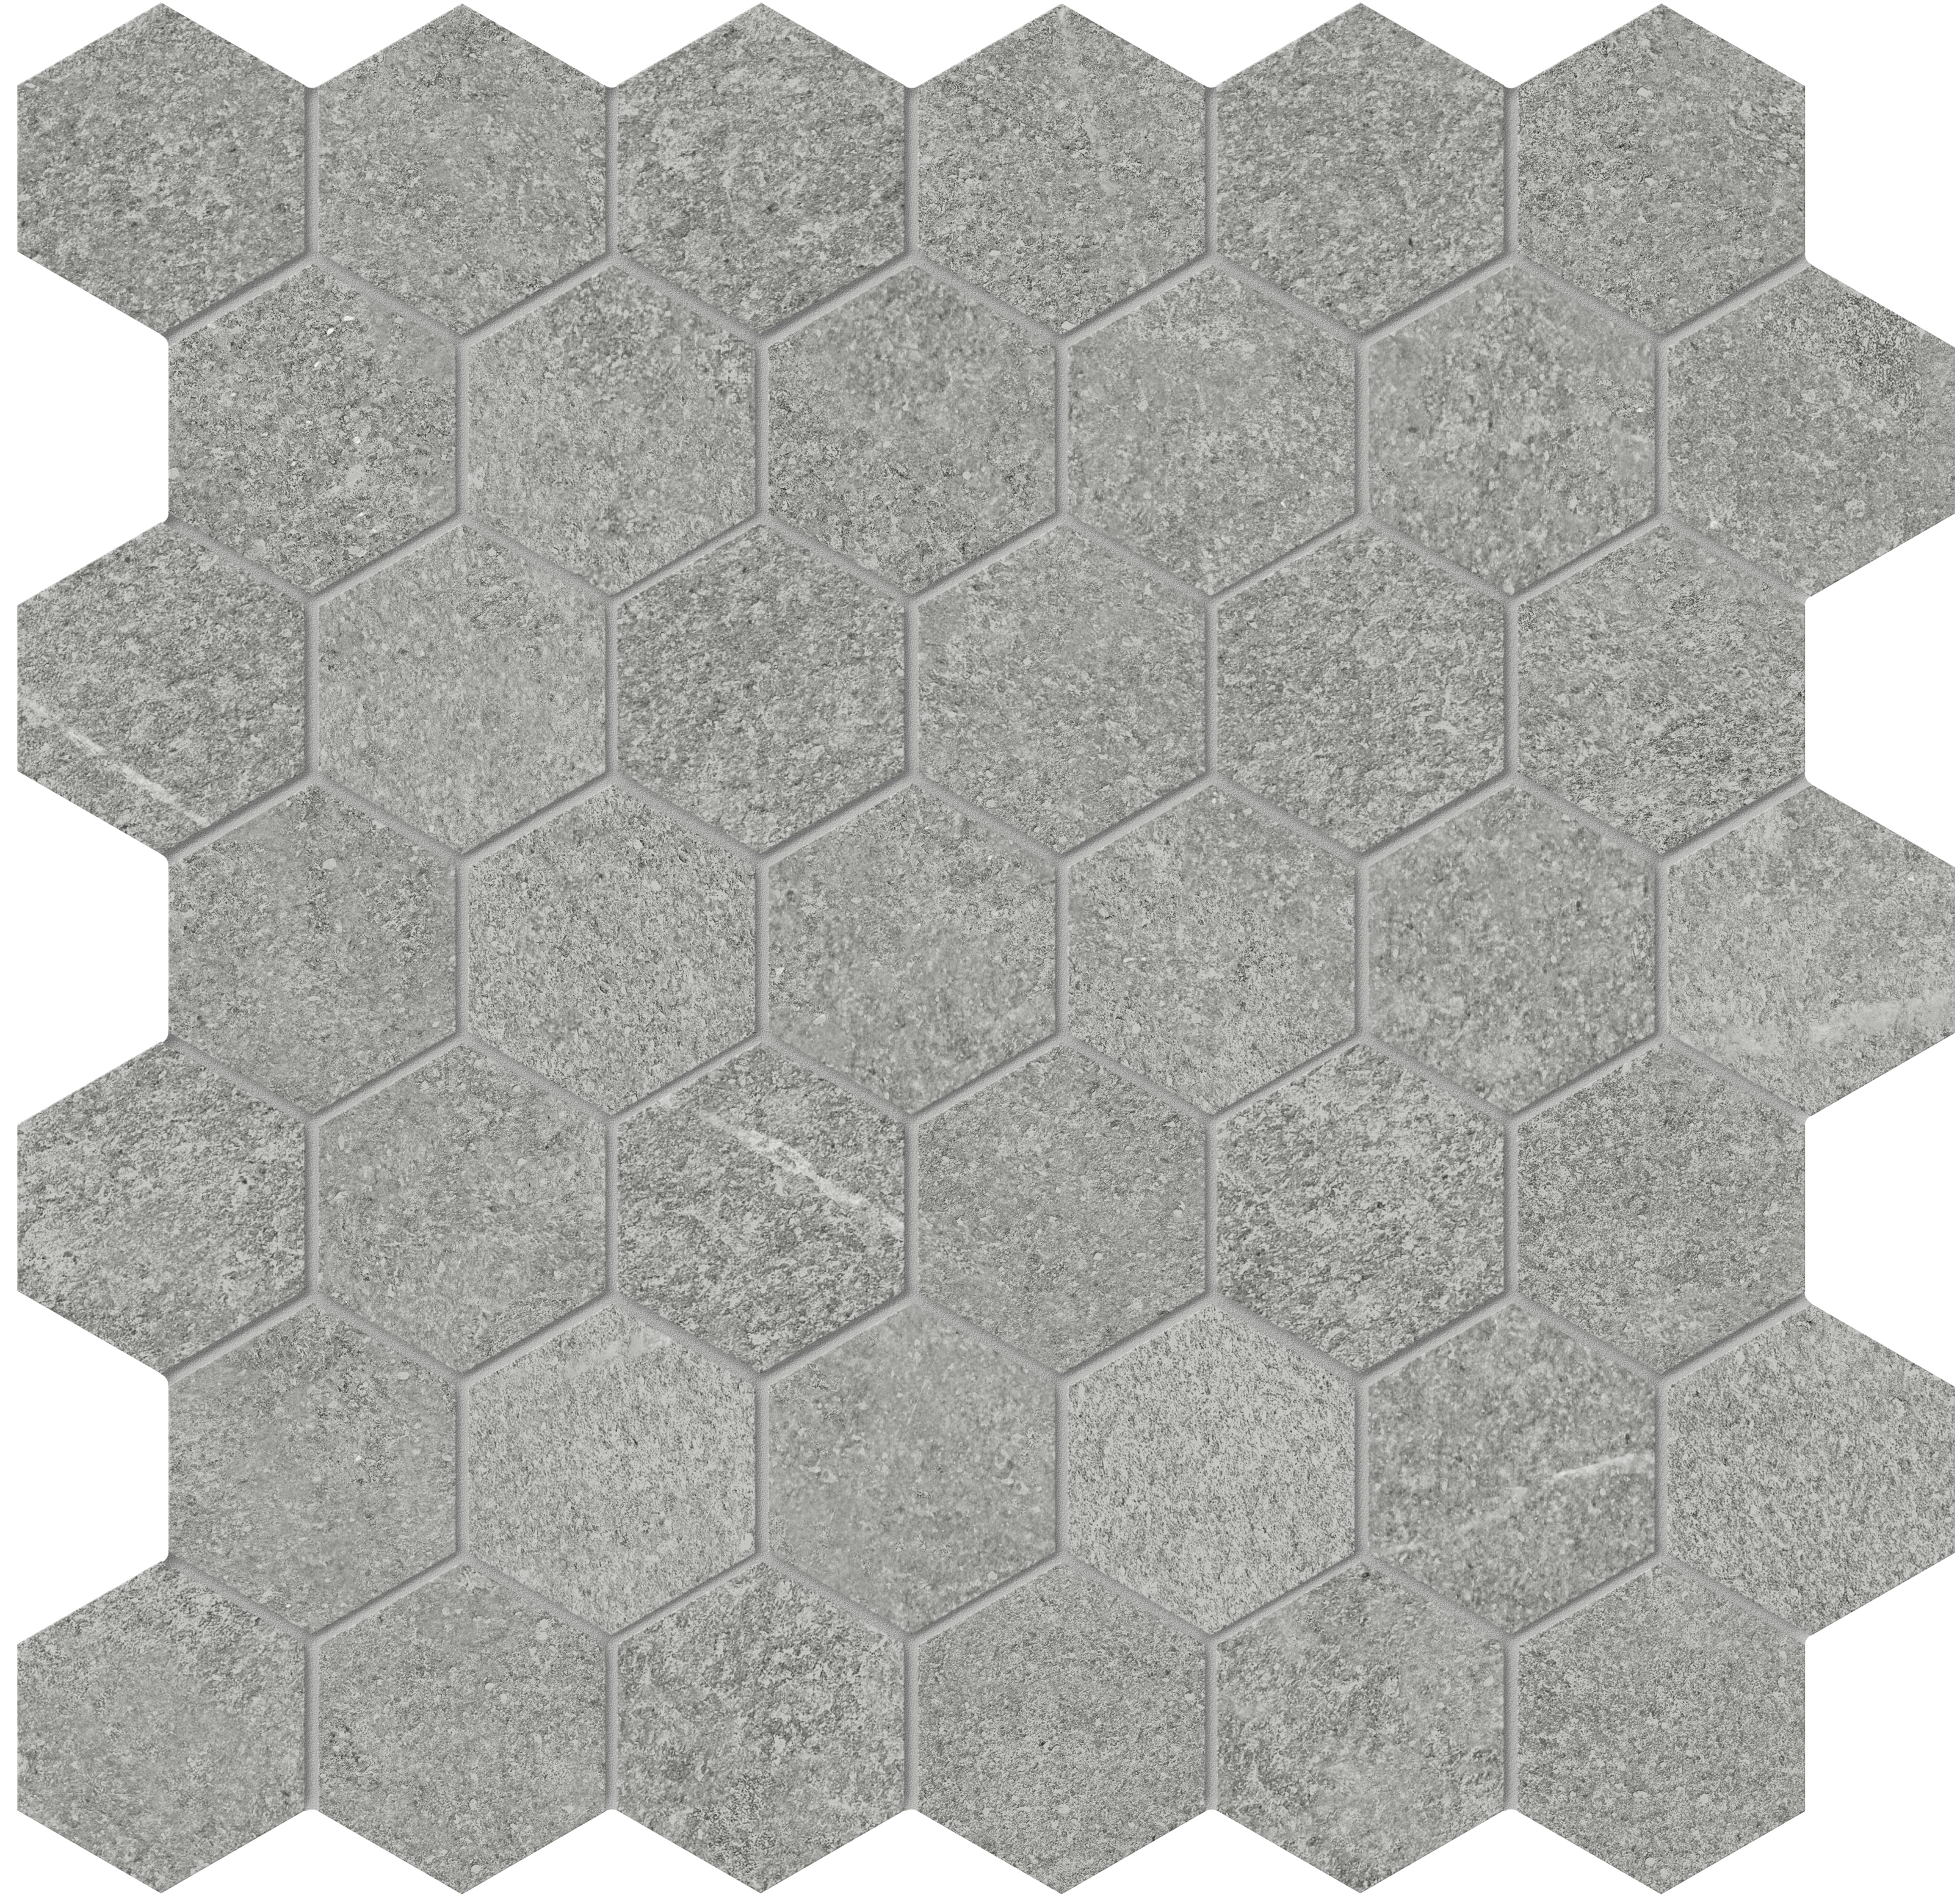 mica hexagon 2-inch pattern color body porcelain mosaic from mjork anatolia collection distributed by surface group international matte finish straight edge edge mesh shape